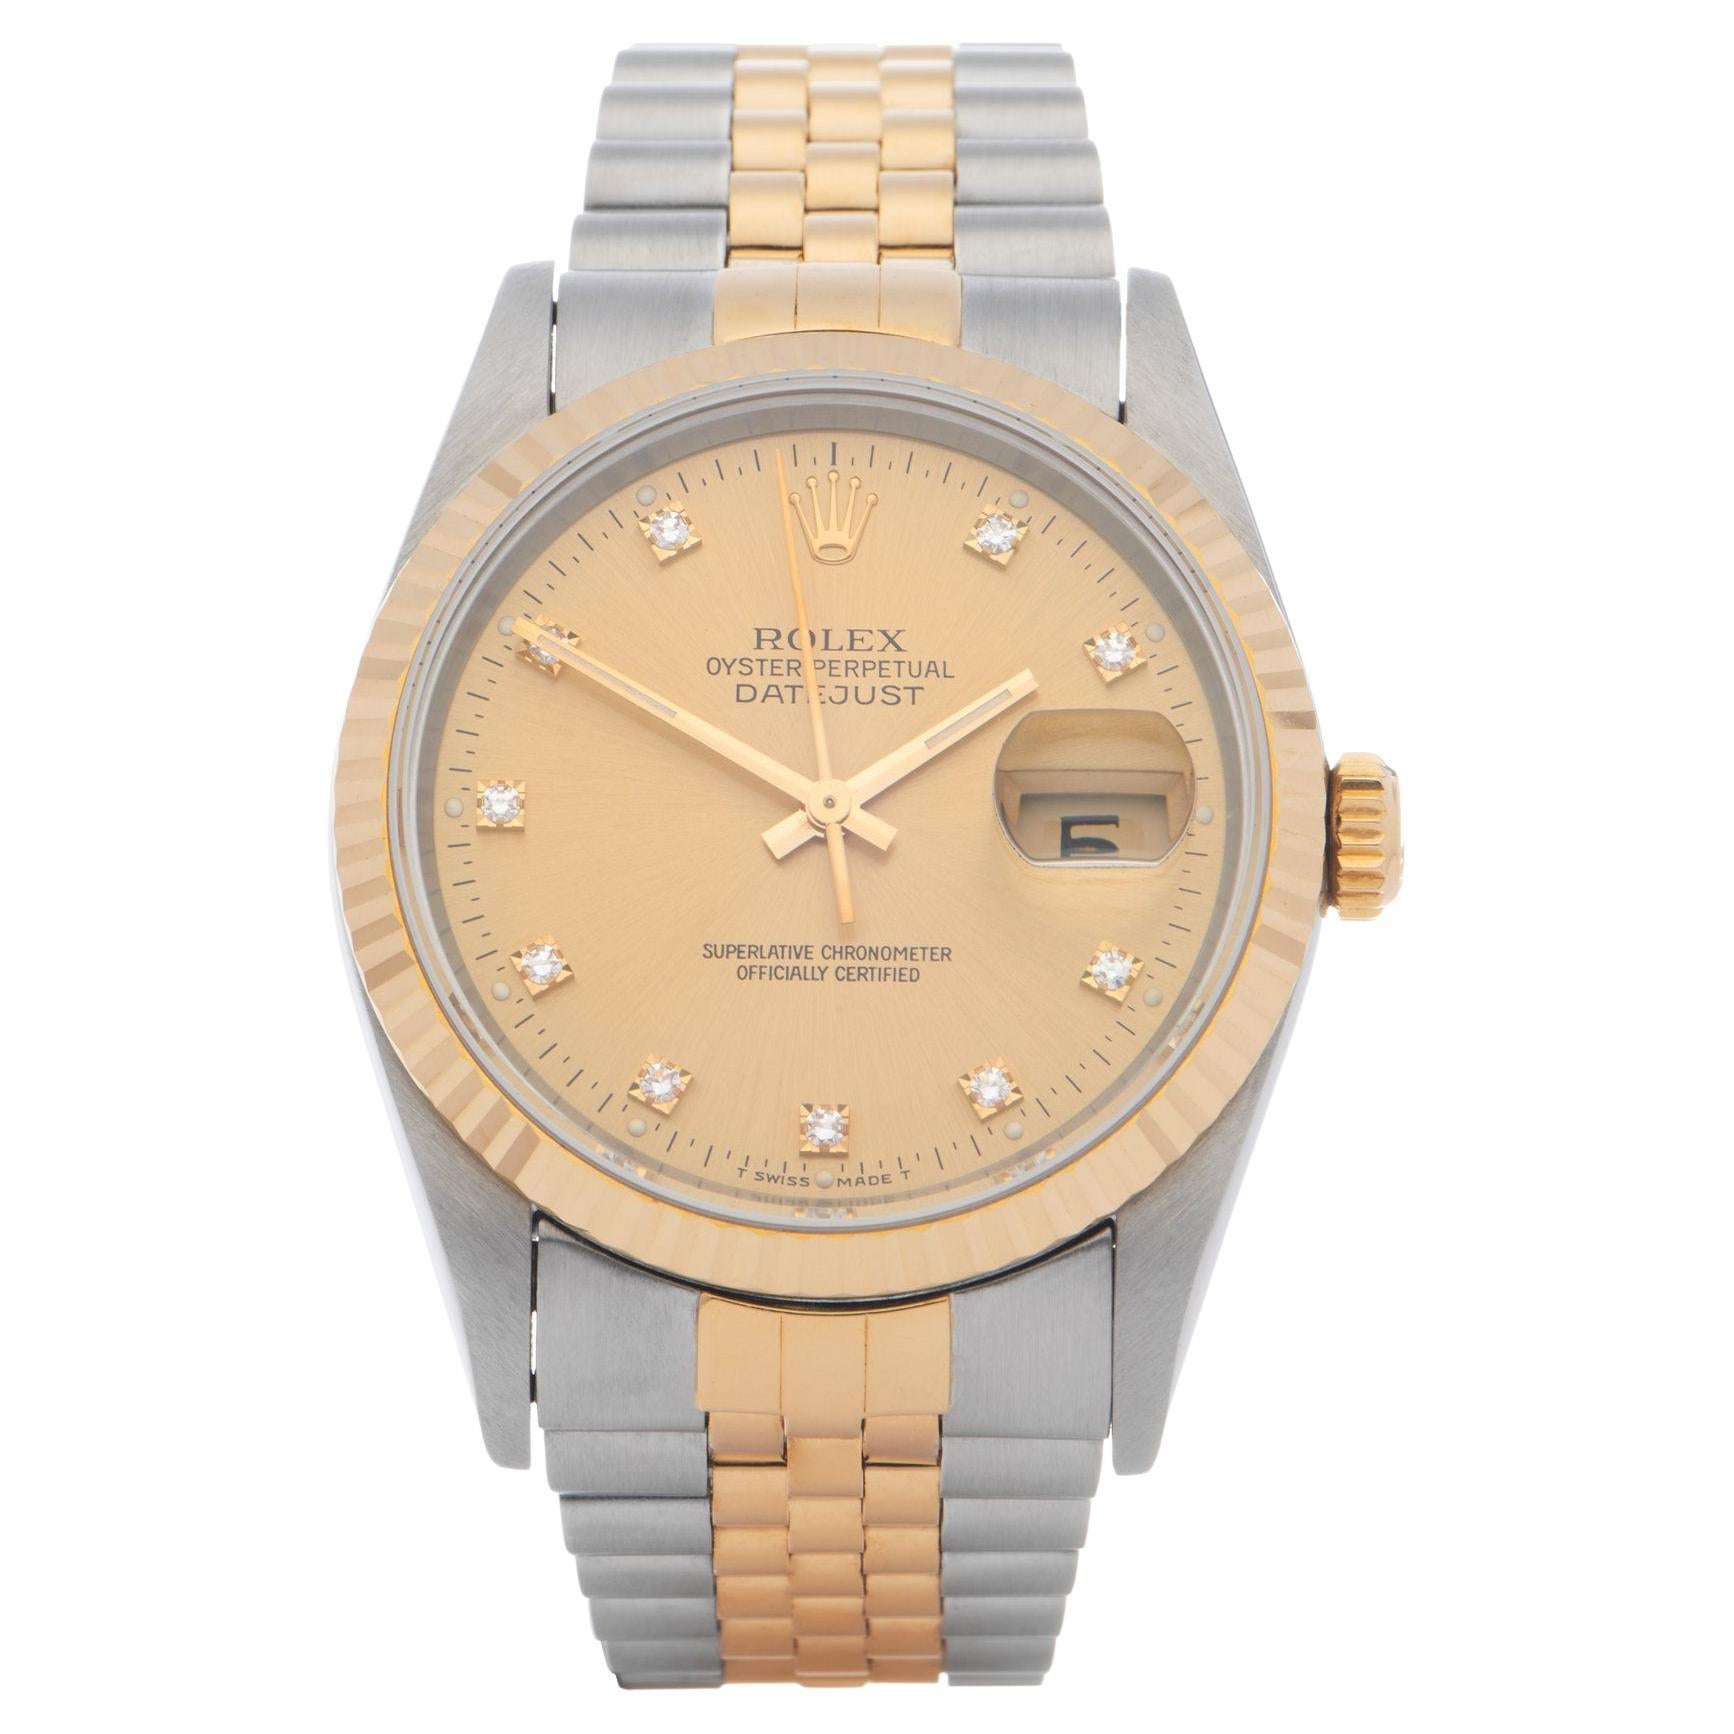 Rolex Datejust 36 16233G Unisex Yellow Gold & Stainless Steel 0 Watch For Sale